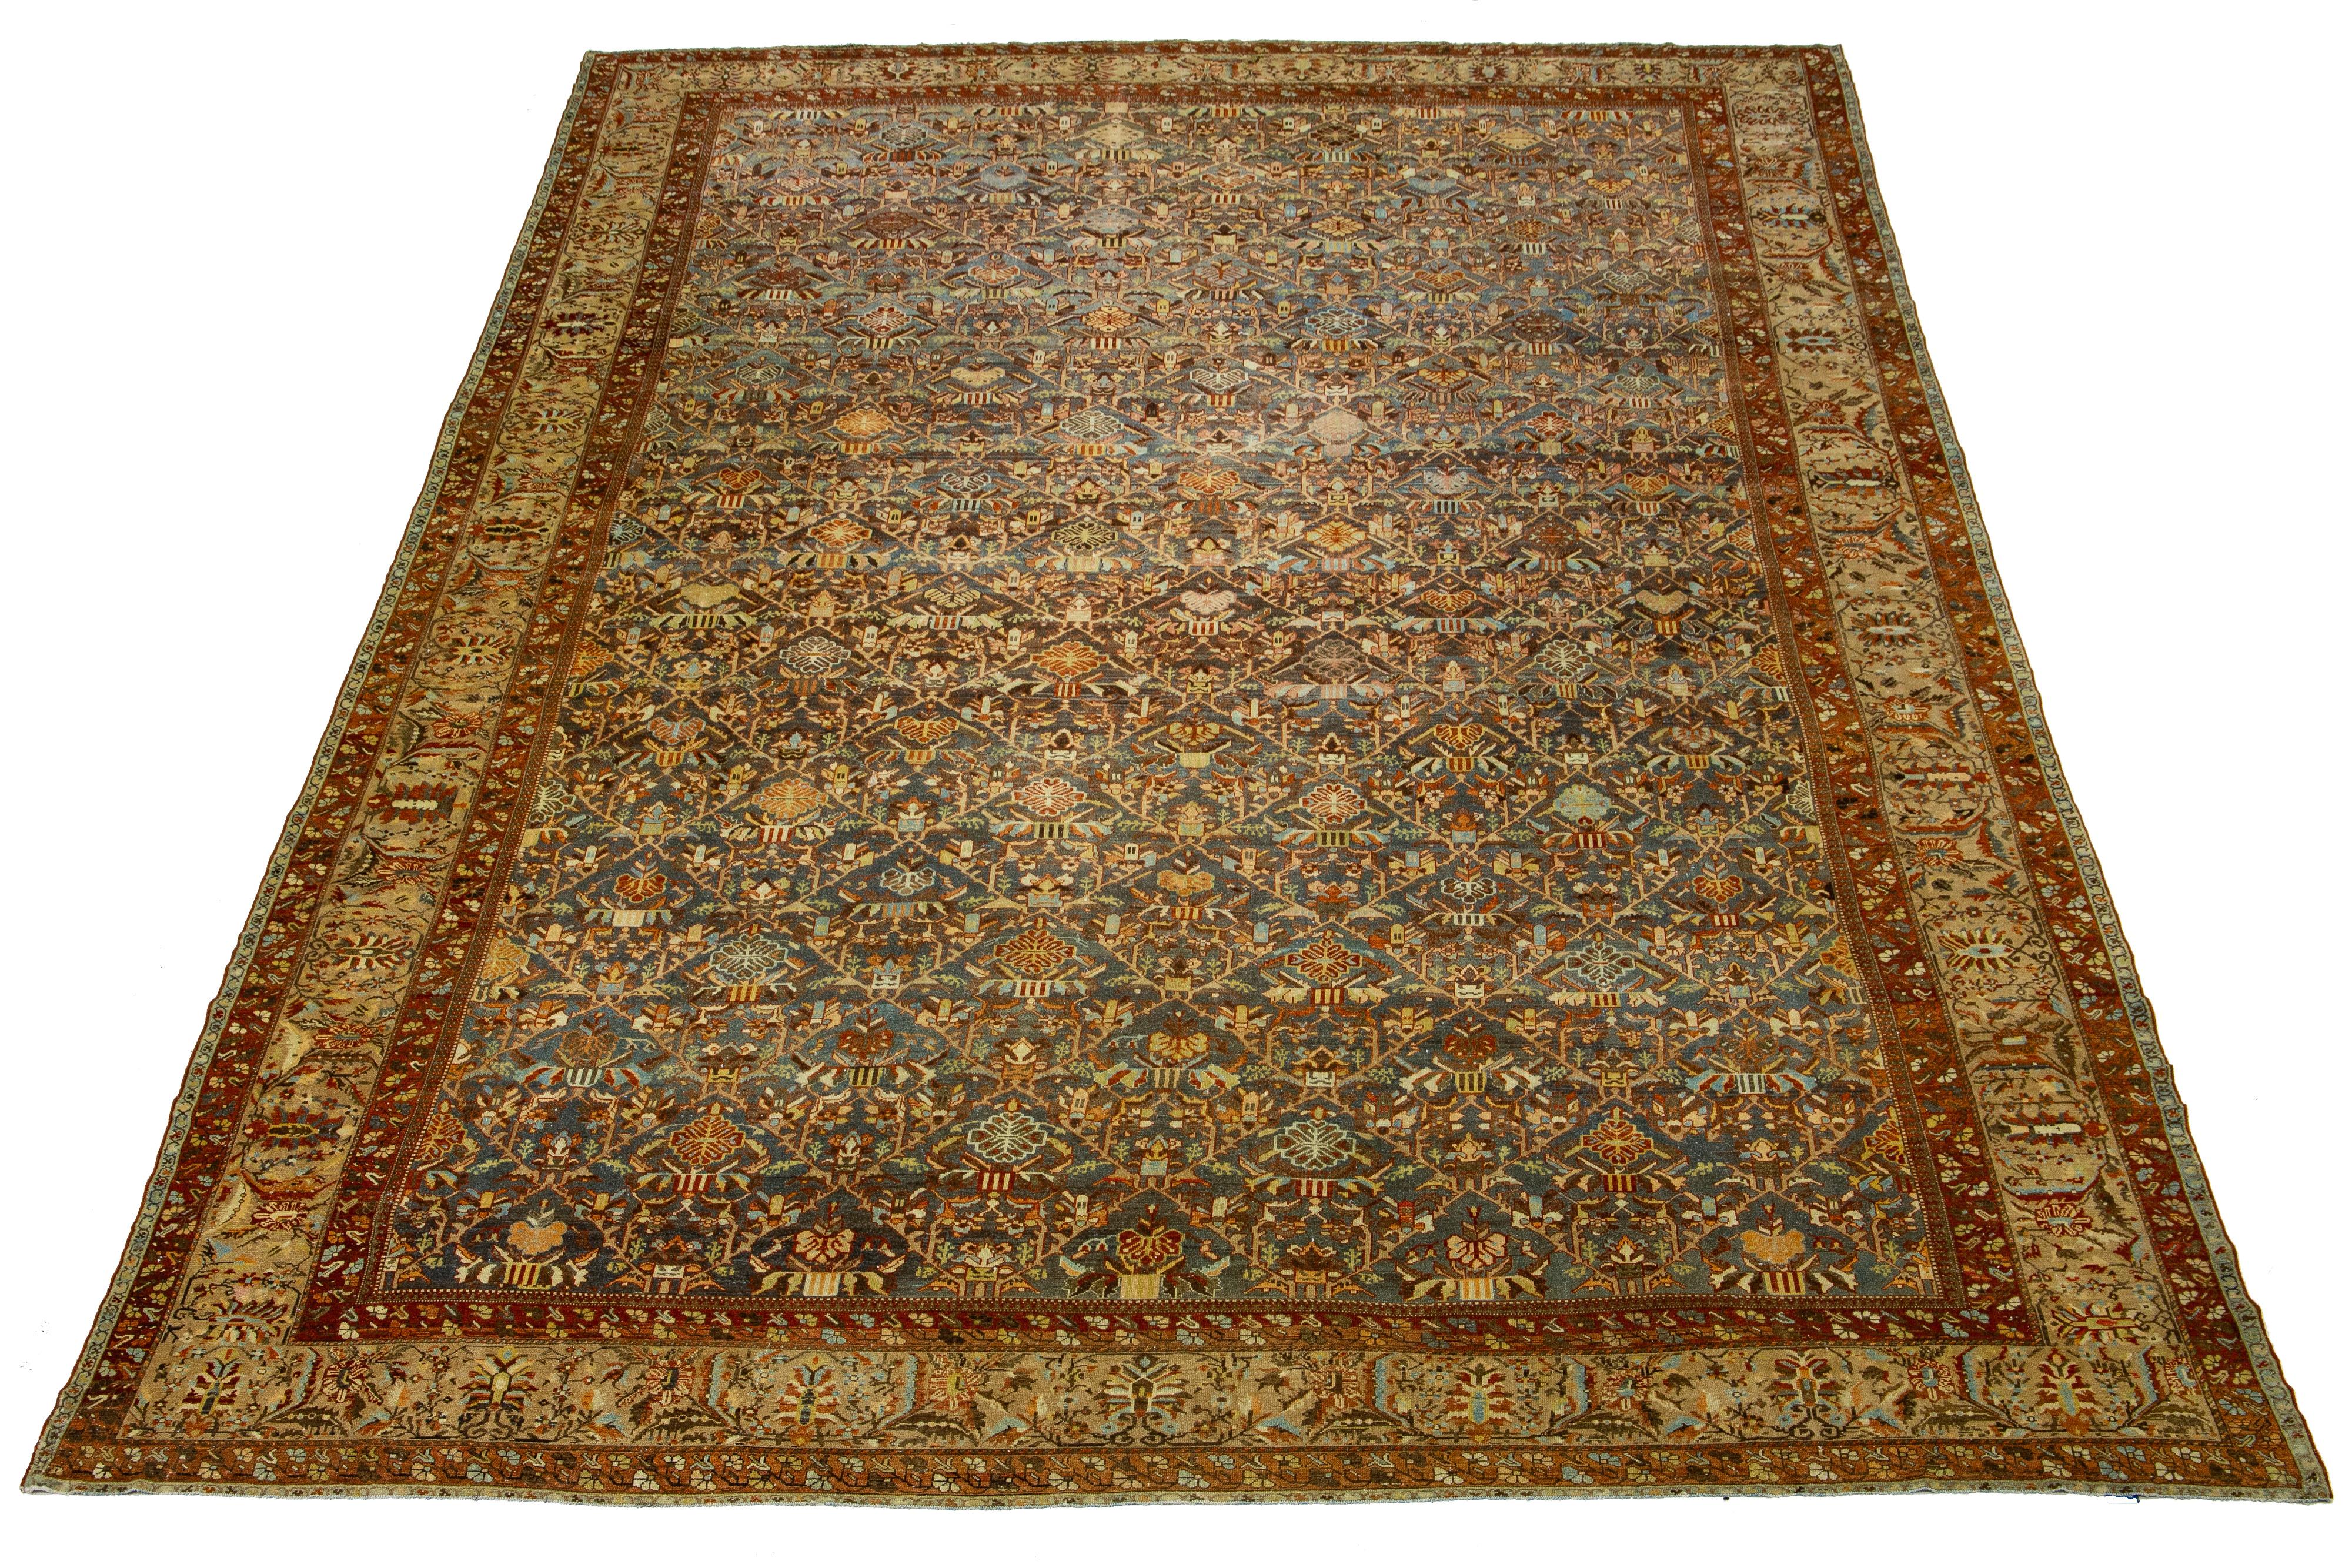 Beautiful Antique Bakhtiari hand-knotted wool rug with a blue color field. This Persian piece has a classic multicolor floral design.

This rug measures 15'9